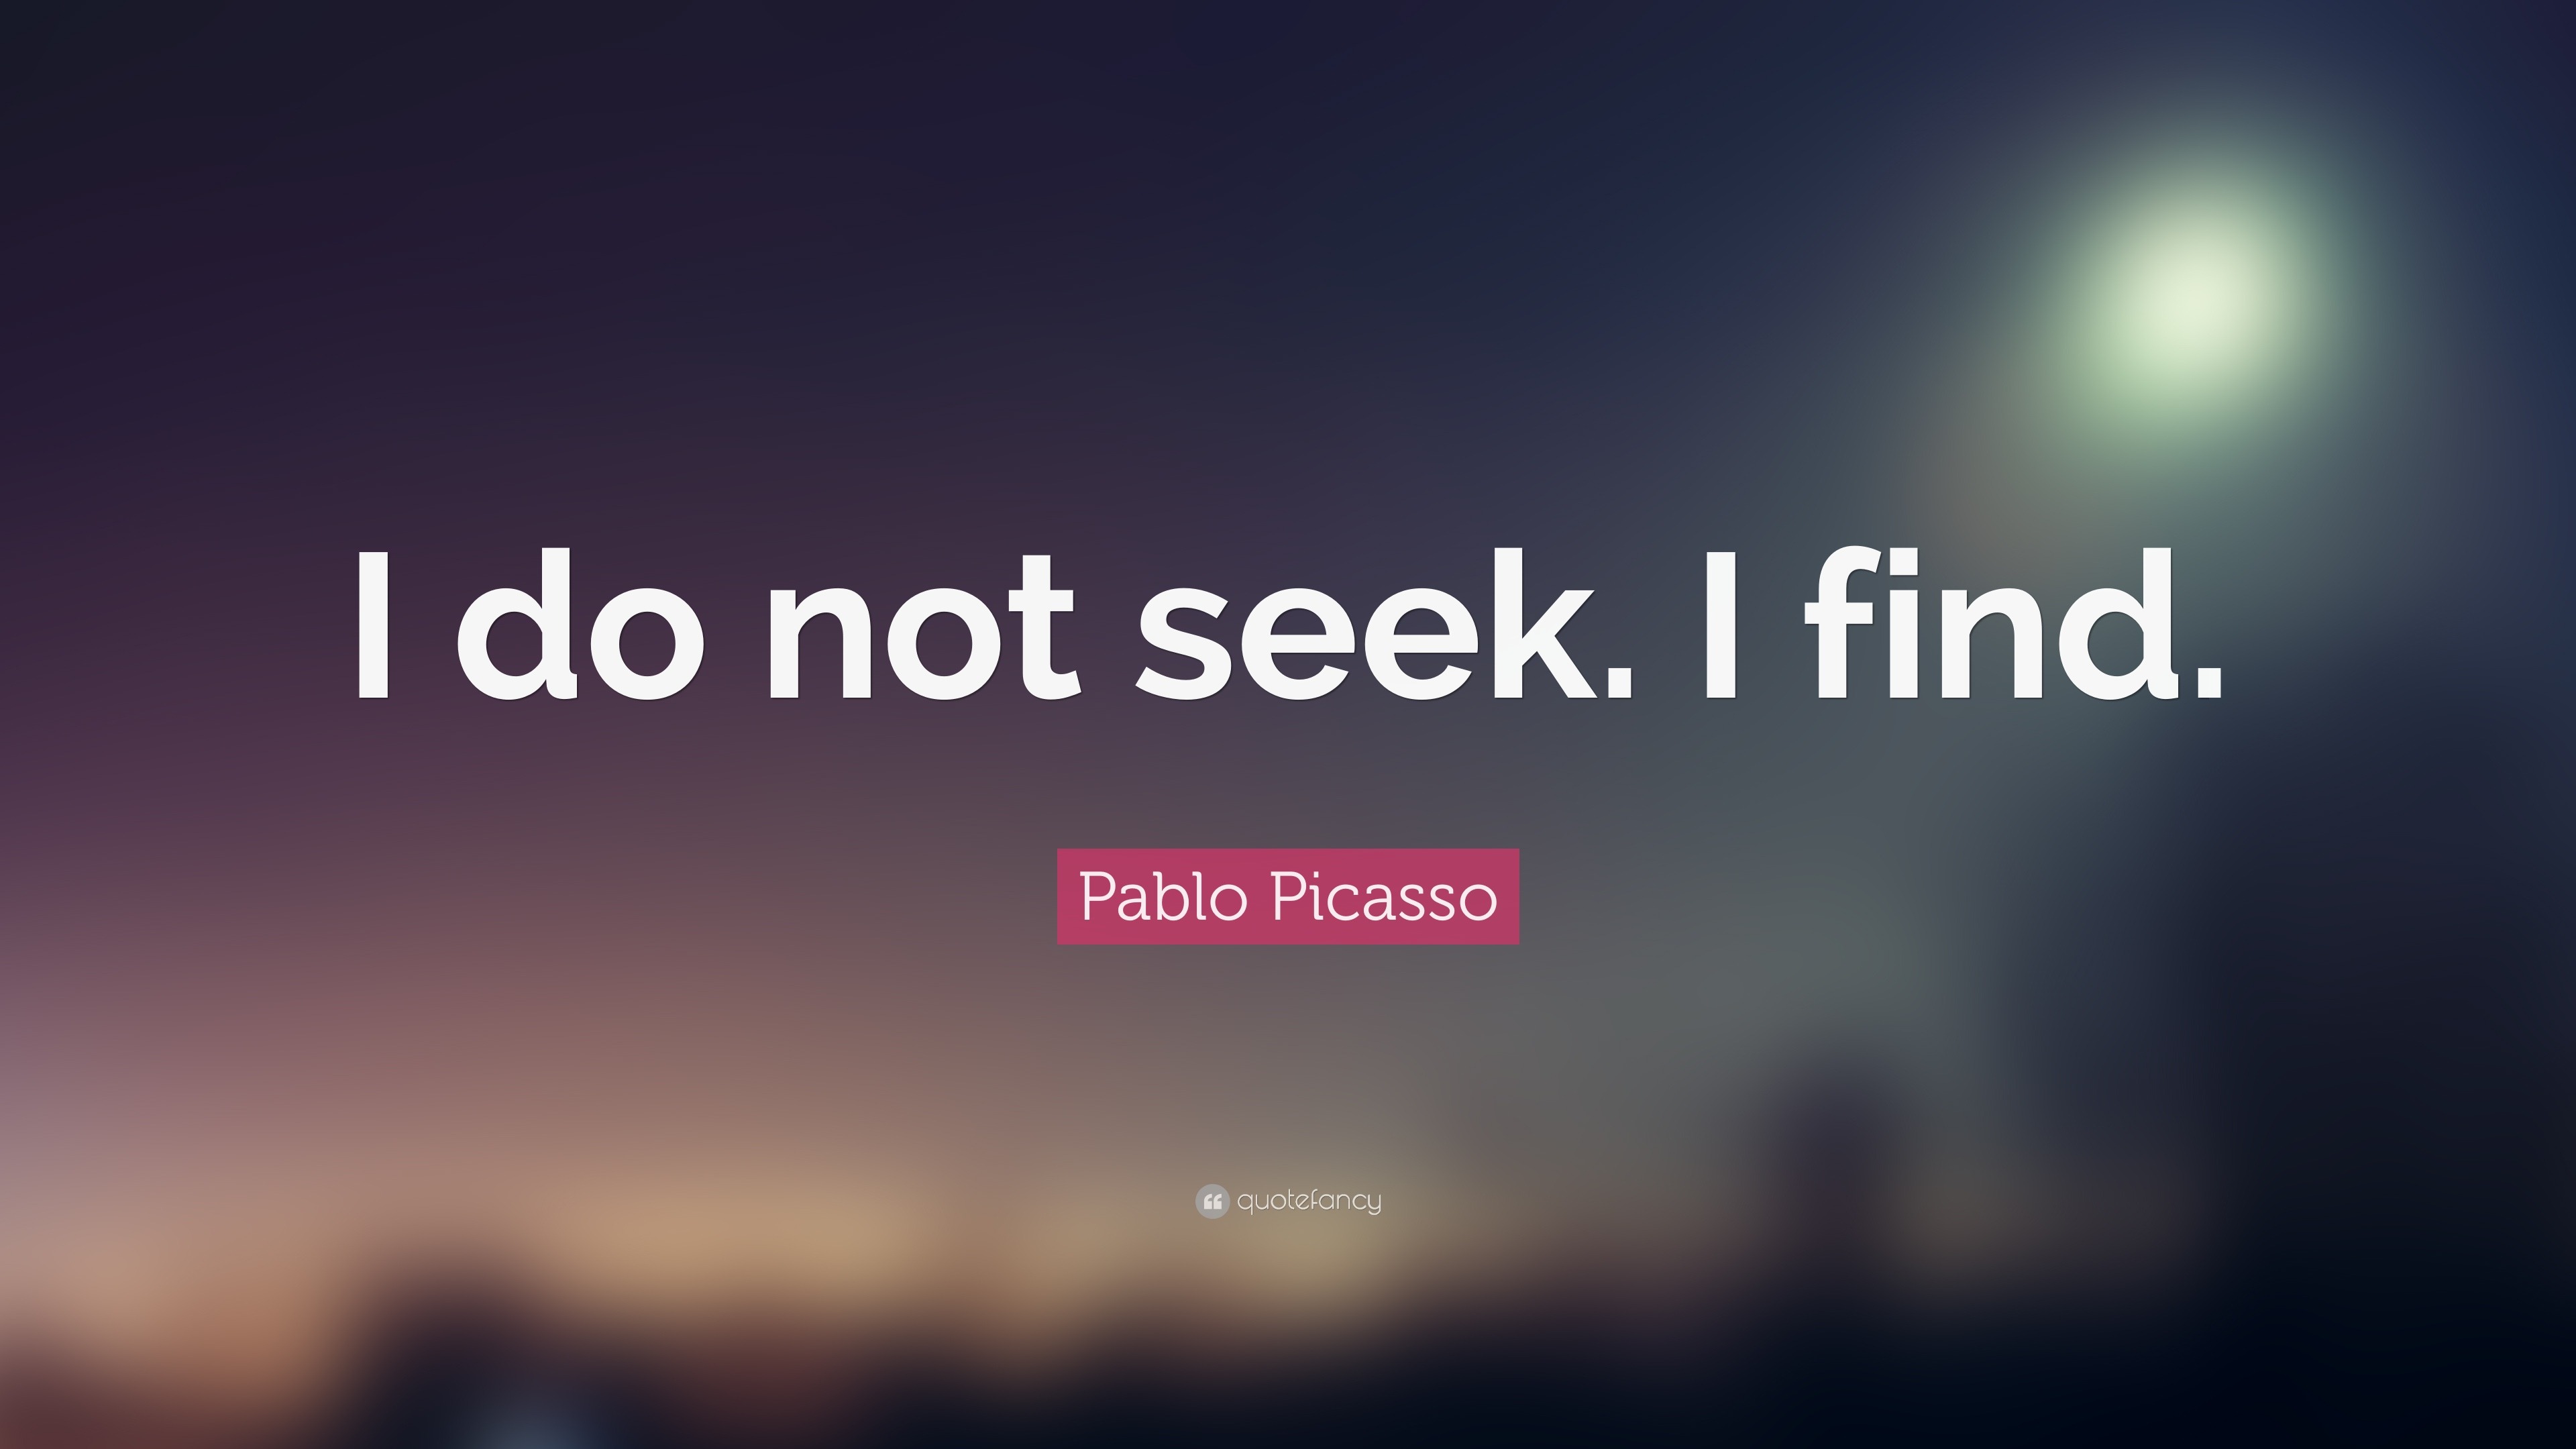 Pablo Picasso Quote “I do not seek I find ”